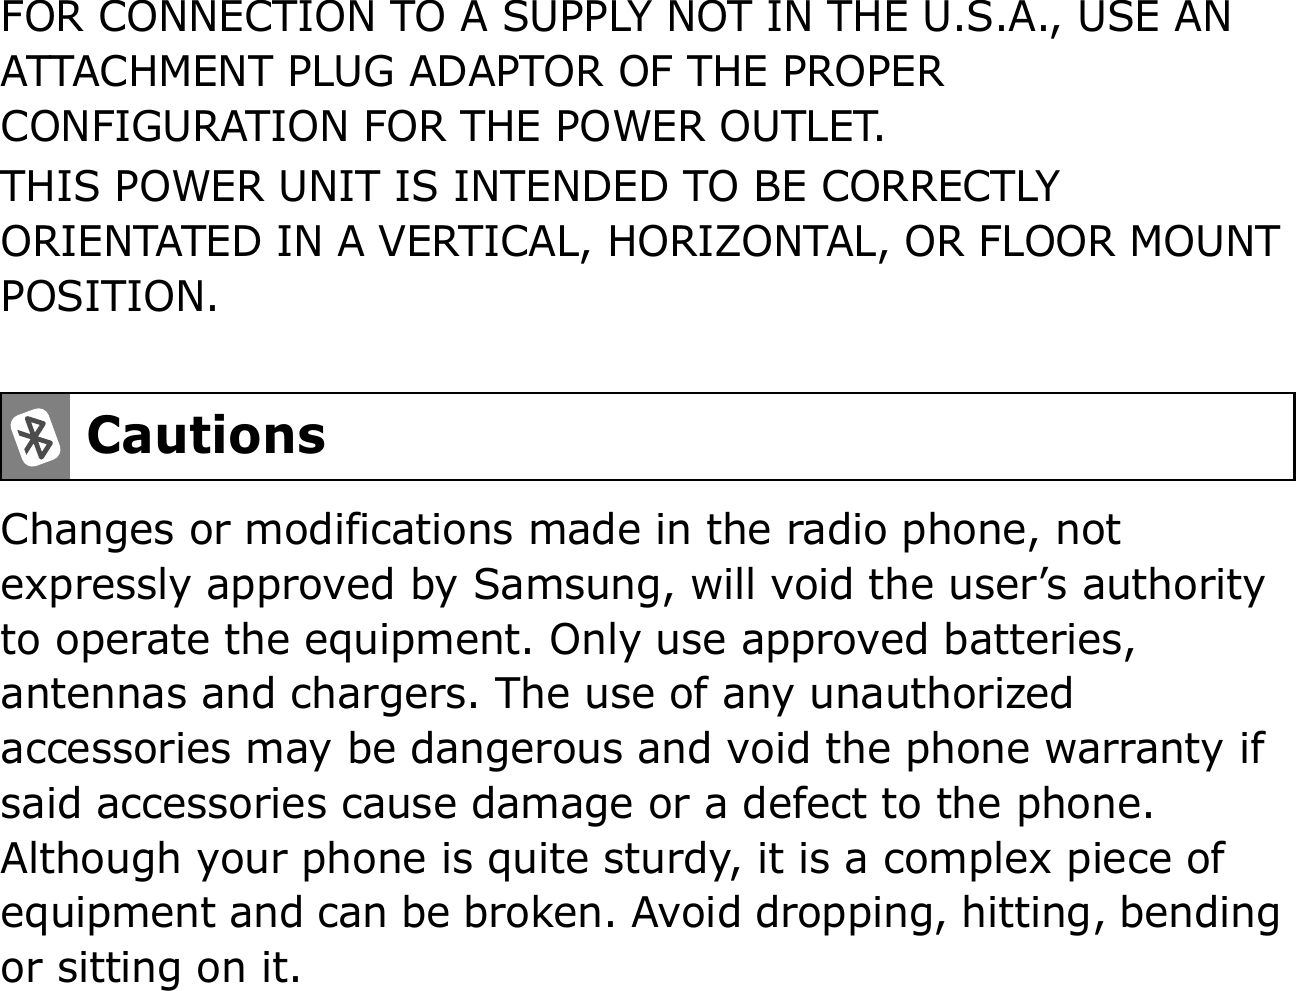 FOR CONNECTION TO A SUPPLY NOT IN THE U.S.A., USE AN ATTACHMENT PLUG ADAPTOR OF THE PROPER CONFIGURATION FOR THE POWER OUTLET.THIS POWER UNIT IS INTENDED TO BE CORRECTLY ORIENTATED IN A VERTICAL, HORIZONTAL, OR FLOOR MOUNT POSITION.Changes or modifications made in the radio phone, not expressly approved by Samsung, will void the user’s authority to operate the equipment. Only use approved batteries, antennas and chargers. The use of any unauthorized accessories may be dangerous and void the phone warranty if said accessories cause damage or a defect to the phone. Although your phone is quite sturdy, it is a complex piece of equipment and can be broken. Avoid dropping, hitting, bending or sitting on it.Cautions